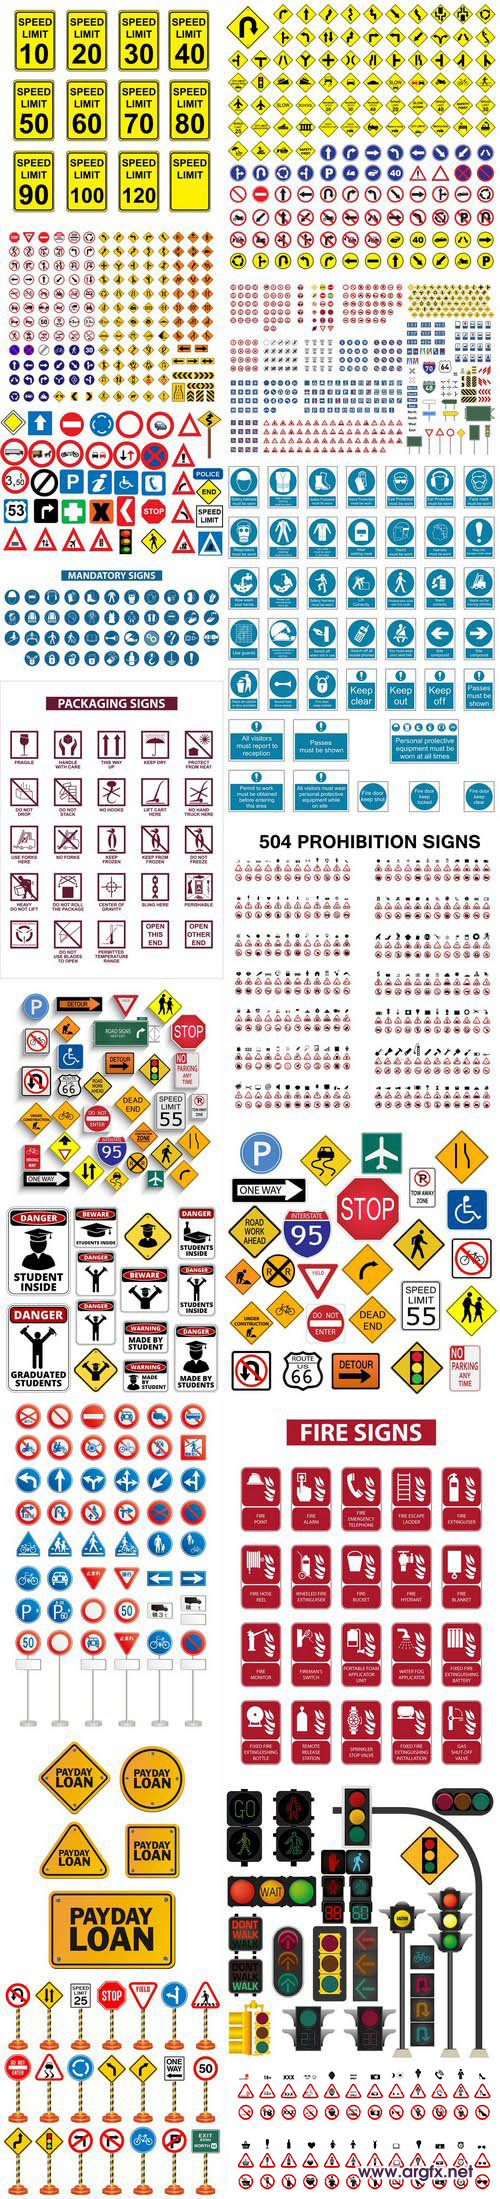  Road signs & under construction 2 - 18xEPS